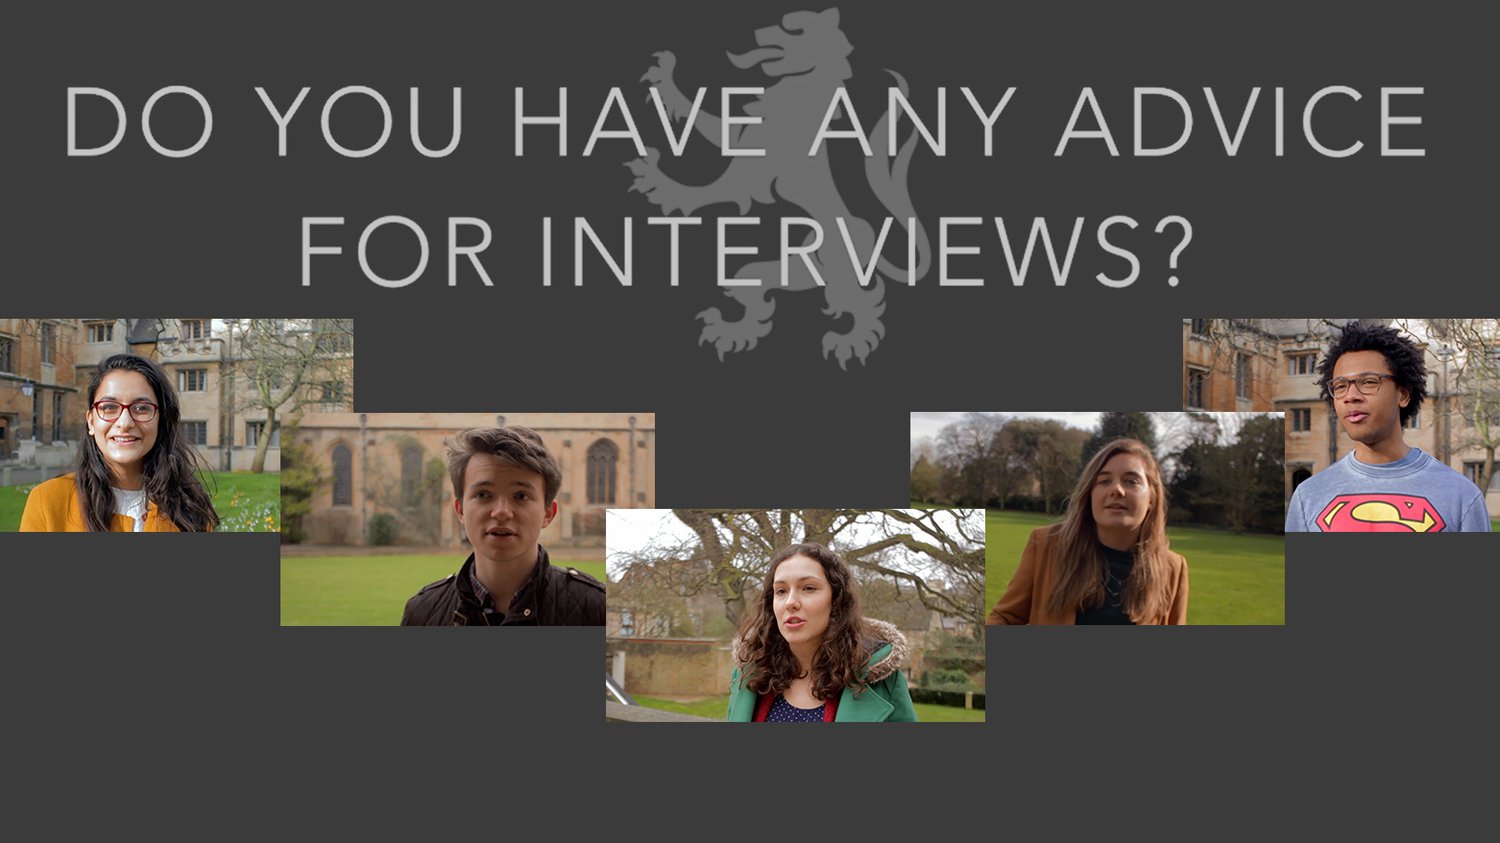 Student Interview Advice